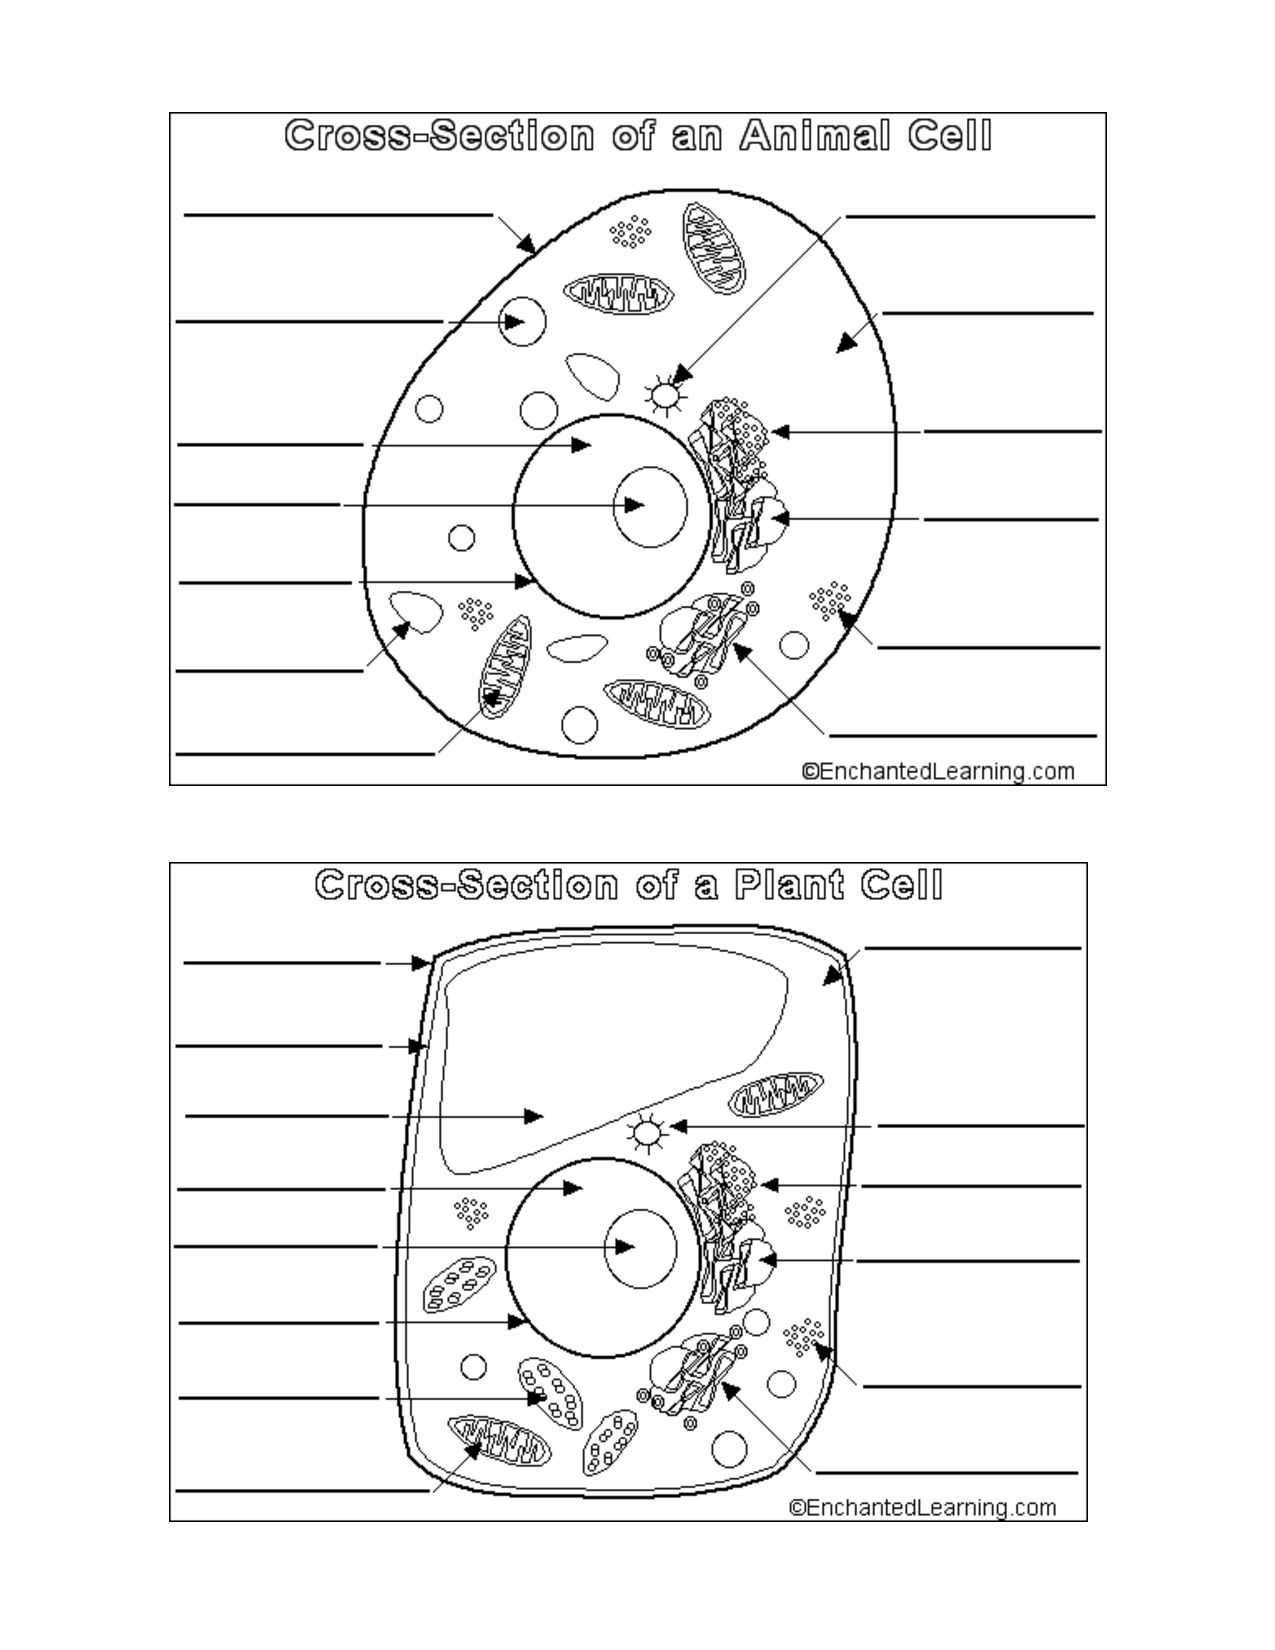 Plant Cell Worksheet Answers Also Perfect Animal and Plant Cells Worksheet 61 for Animal Cell Diagram